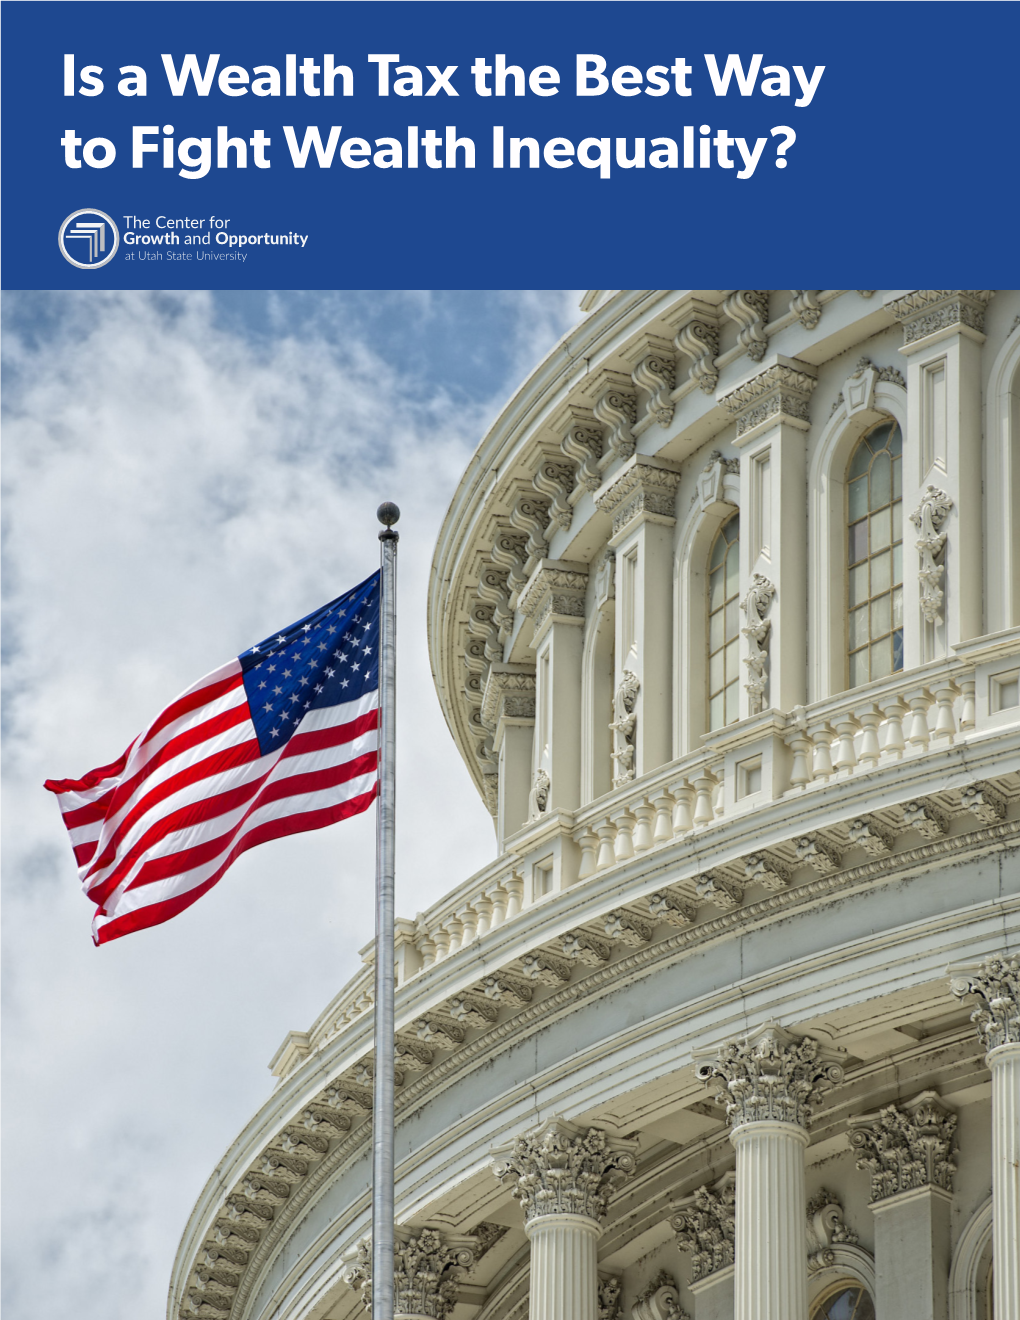 Is a Wealth Tax the Best Way to Fight Wealth Inequality? Is a Wealth Tax the Best Way to Fight Wealth Inequality?